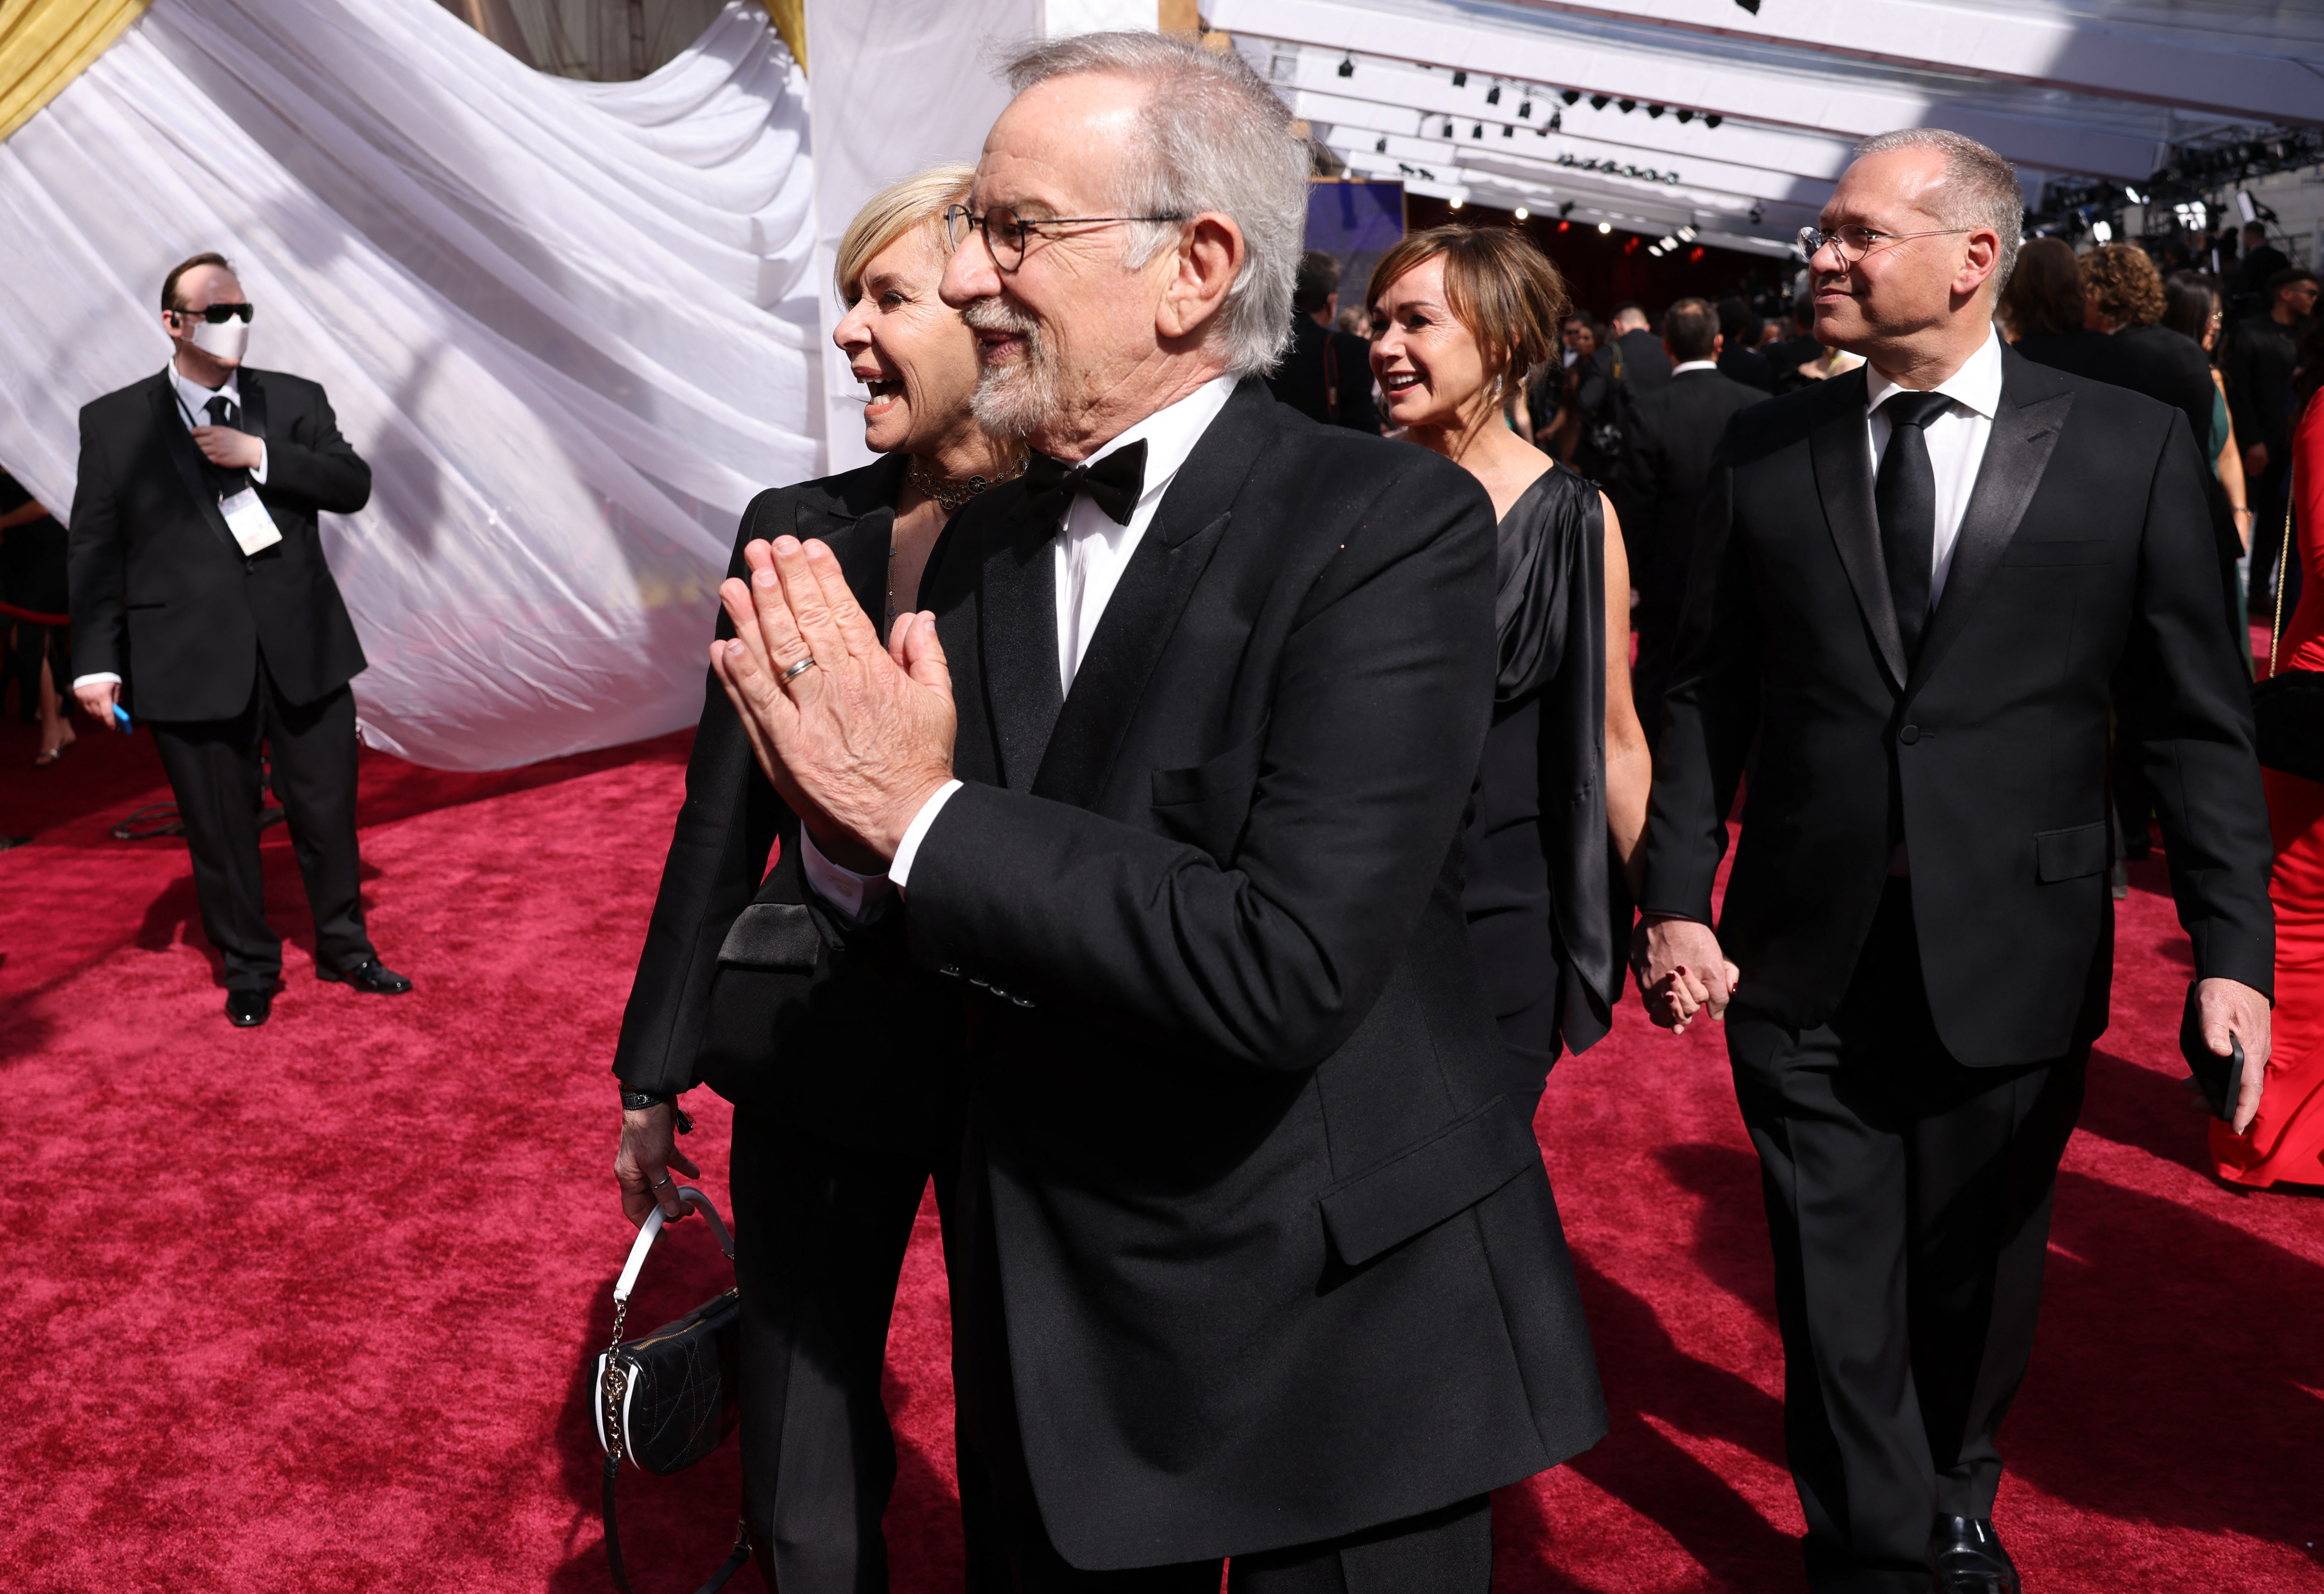 Kate Capshaw and Steven Spielberg walk on the red carpet during the Oscars arrivals at the 94th Academy Awards in Hollywood, Los Angeles, California, U.S., March 27, 2022. REUTERS/Mike Blake